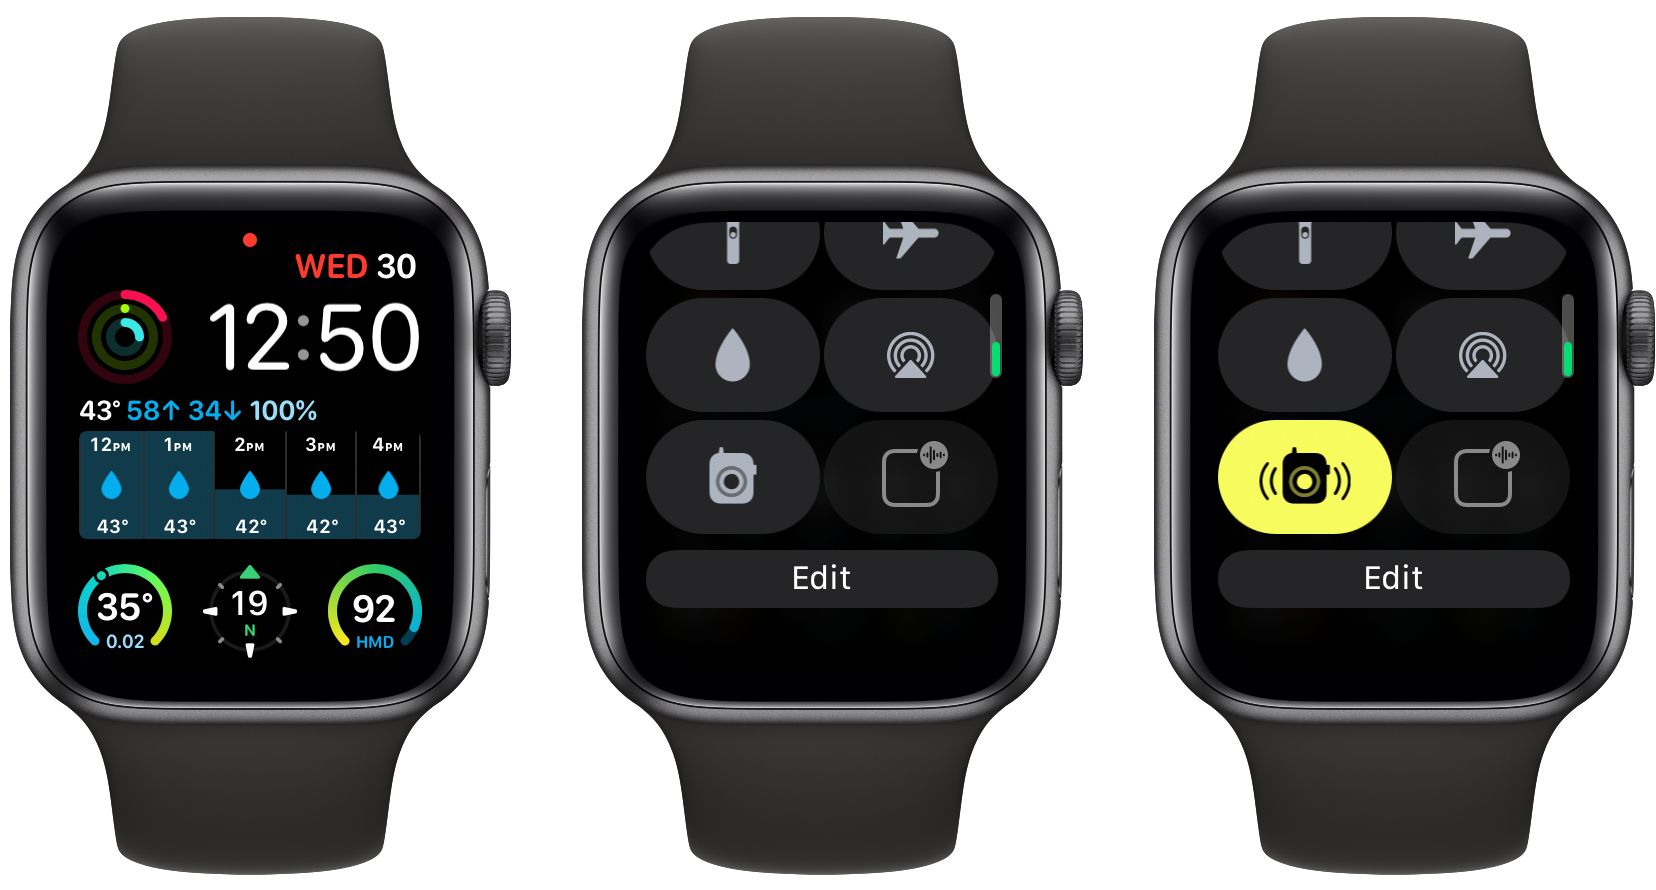 apple watch walkie talkie control center - Come utilizzare il walkie-talkie su Apple Watch